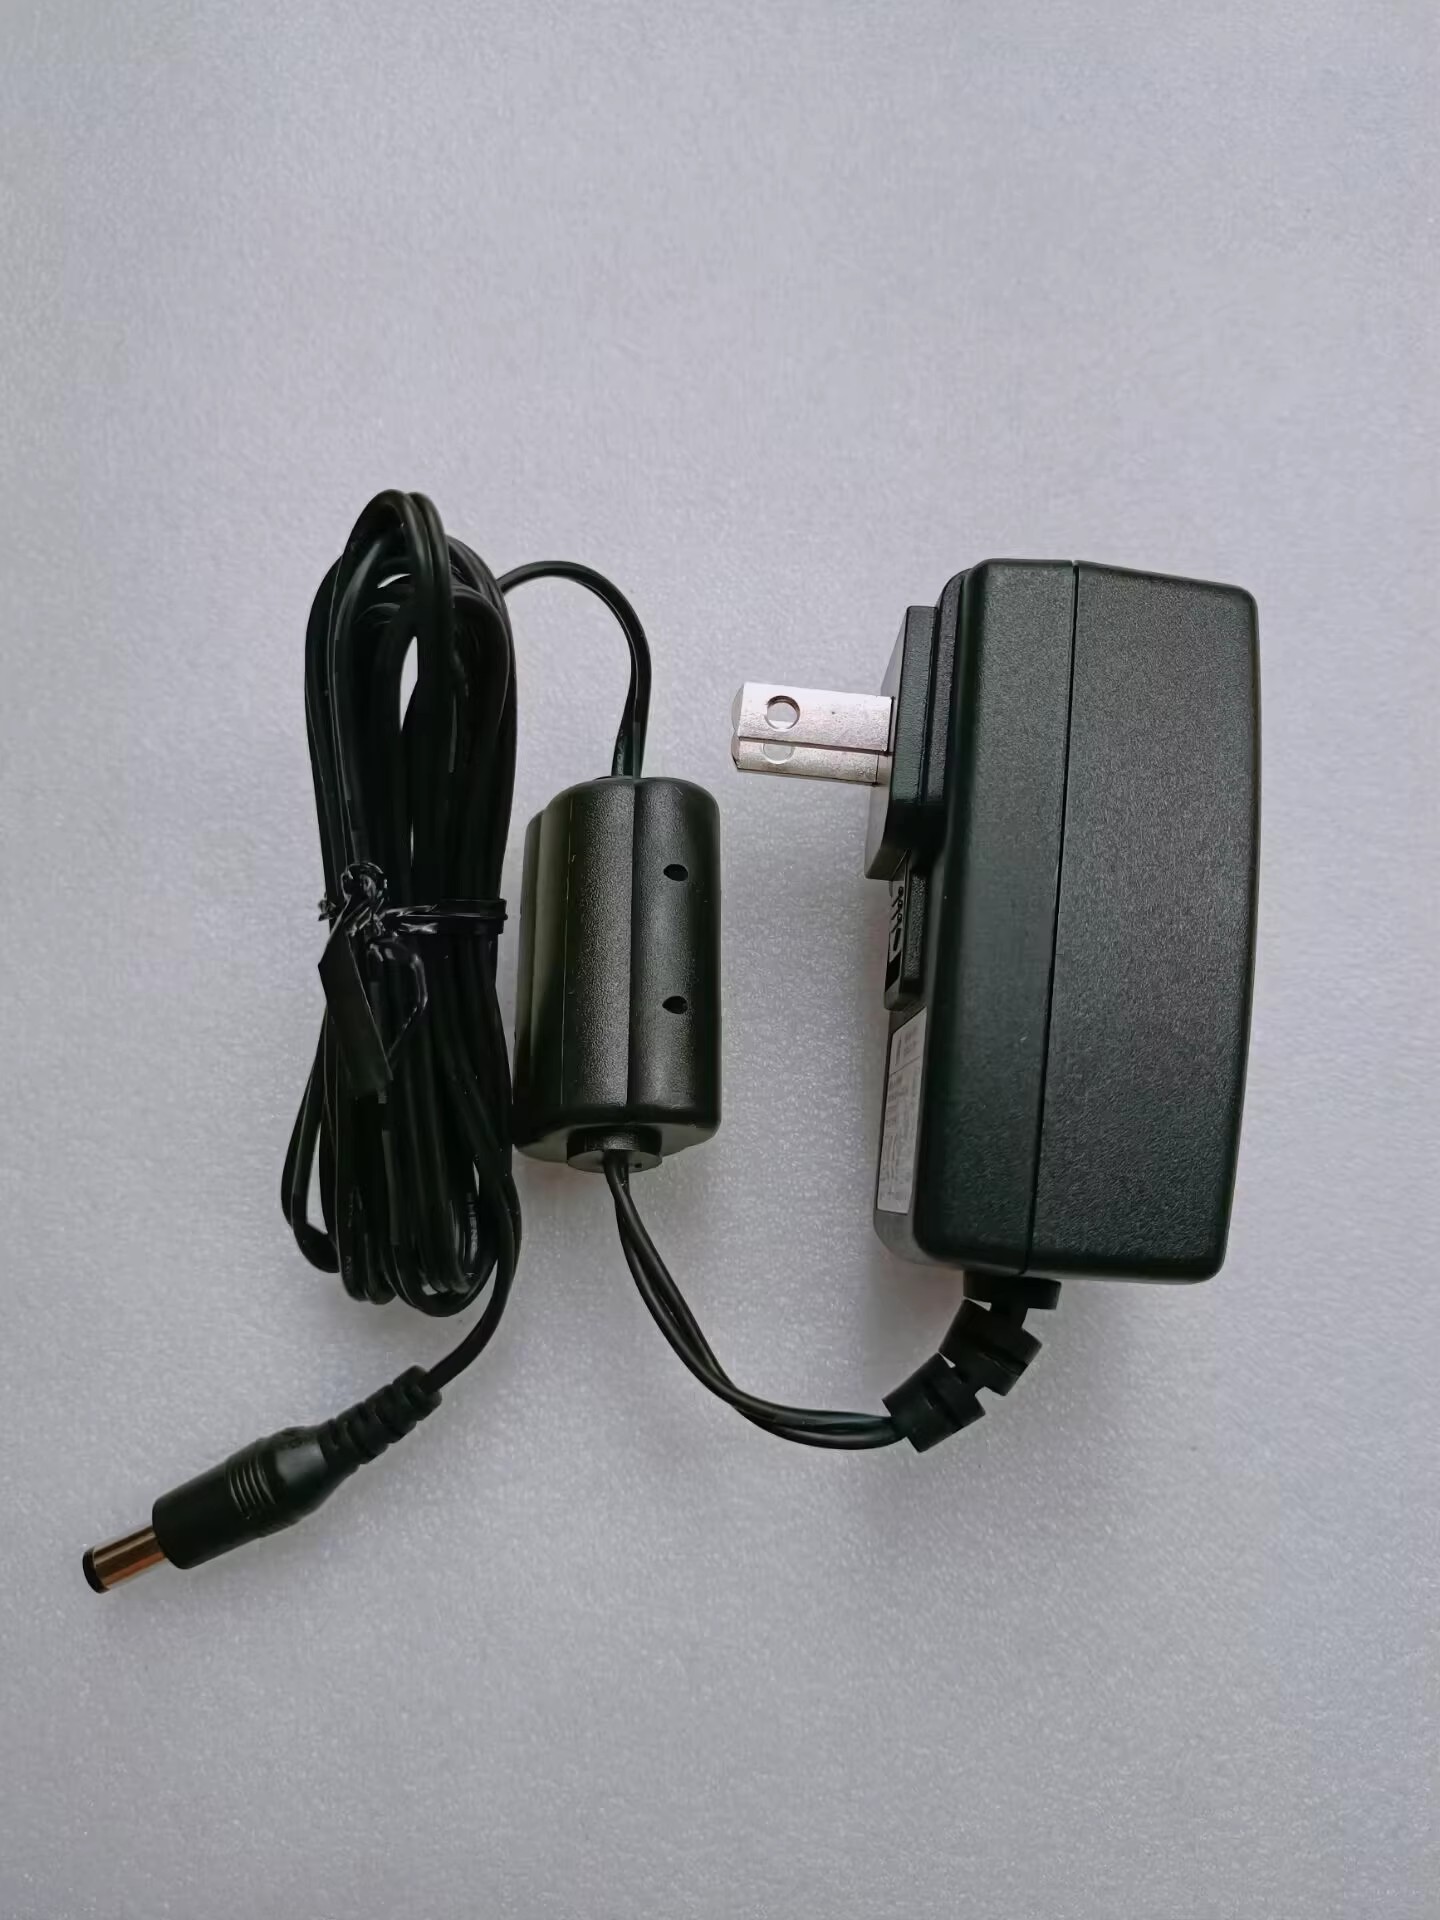 *Brand NEW* 3A-161WP09 ENG 9V 1.7A AC DC ADAPTHE POWER Supply